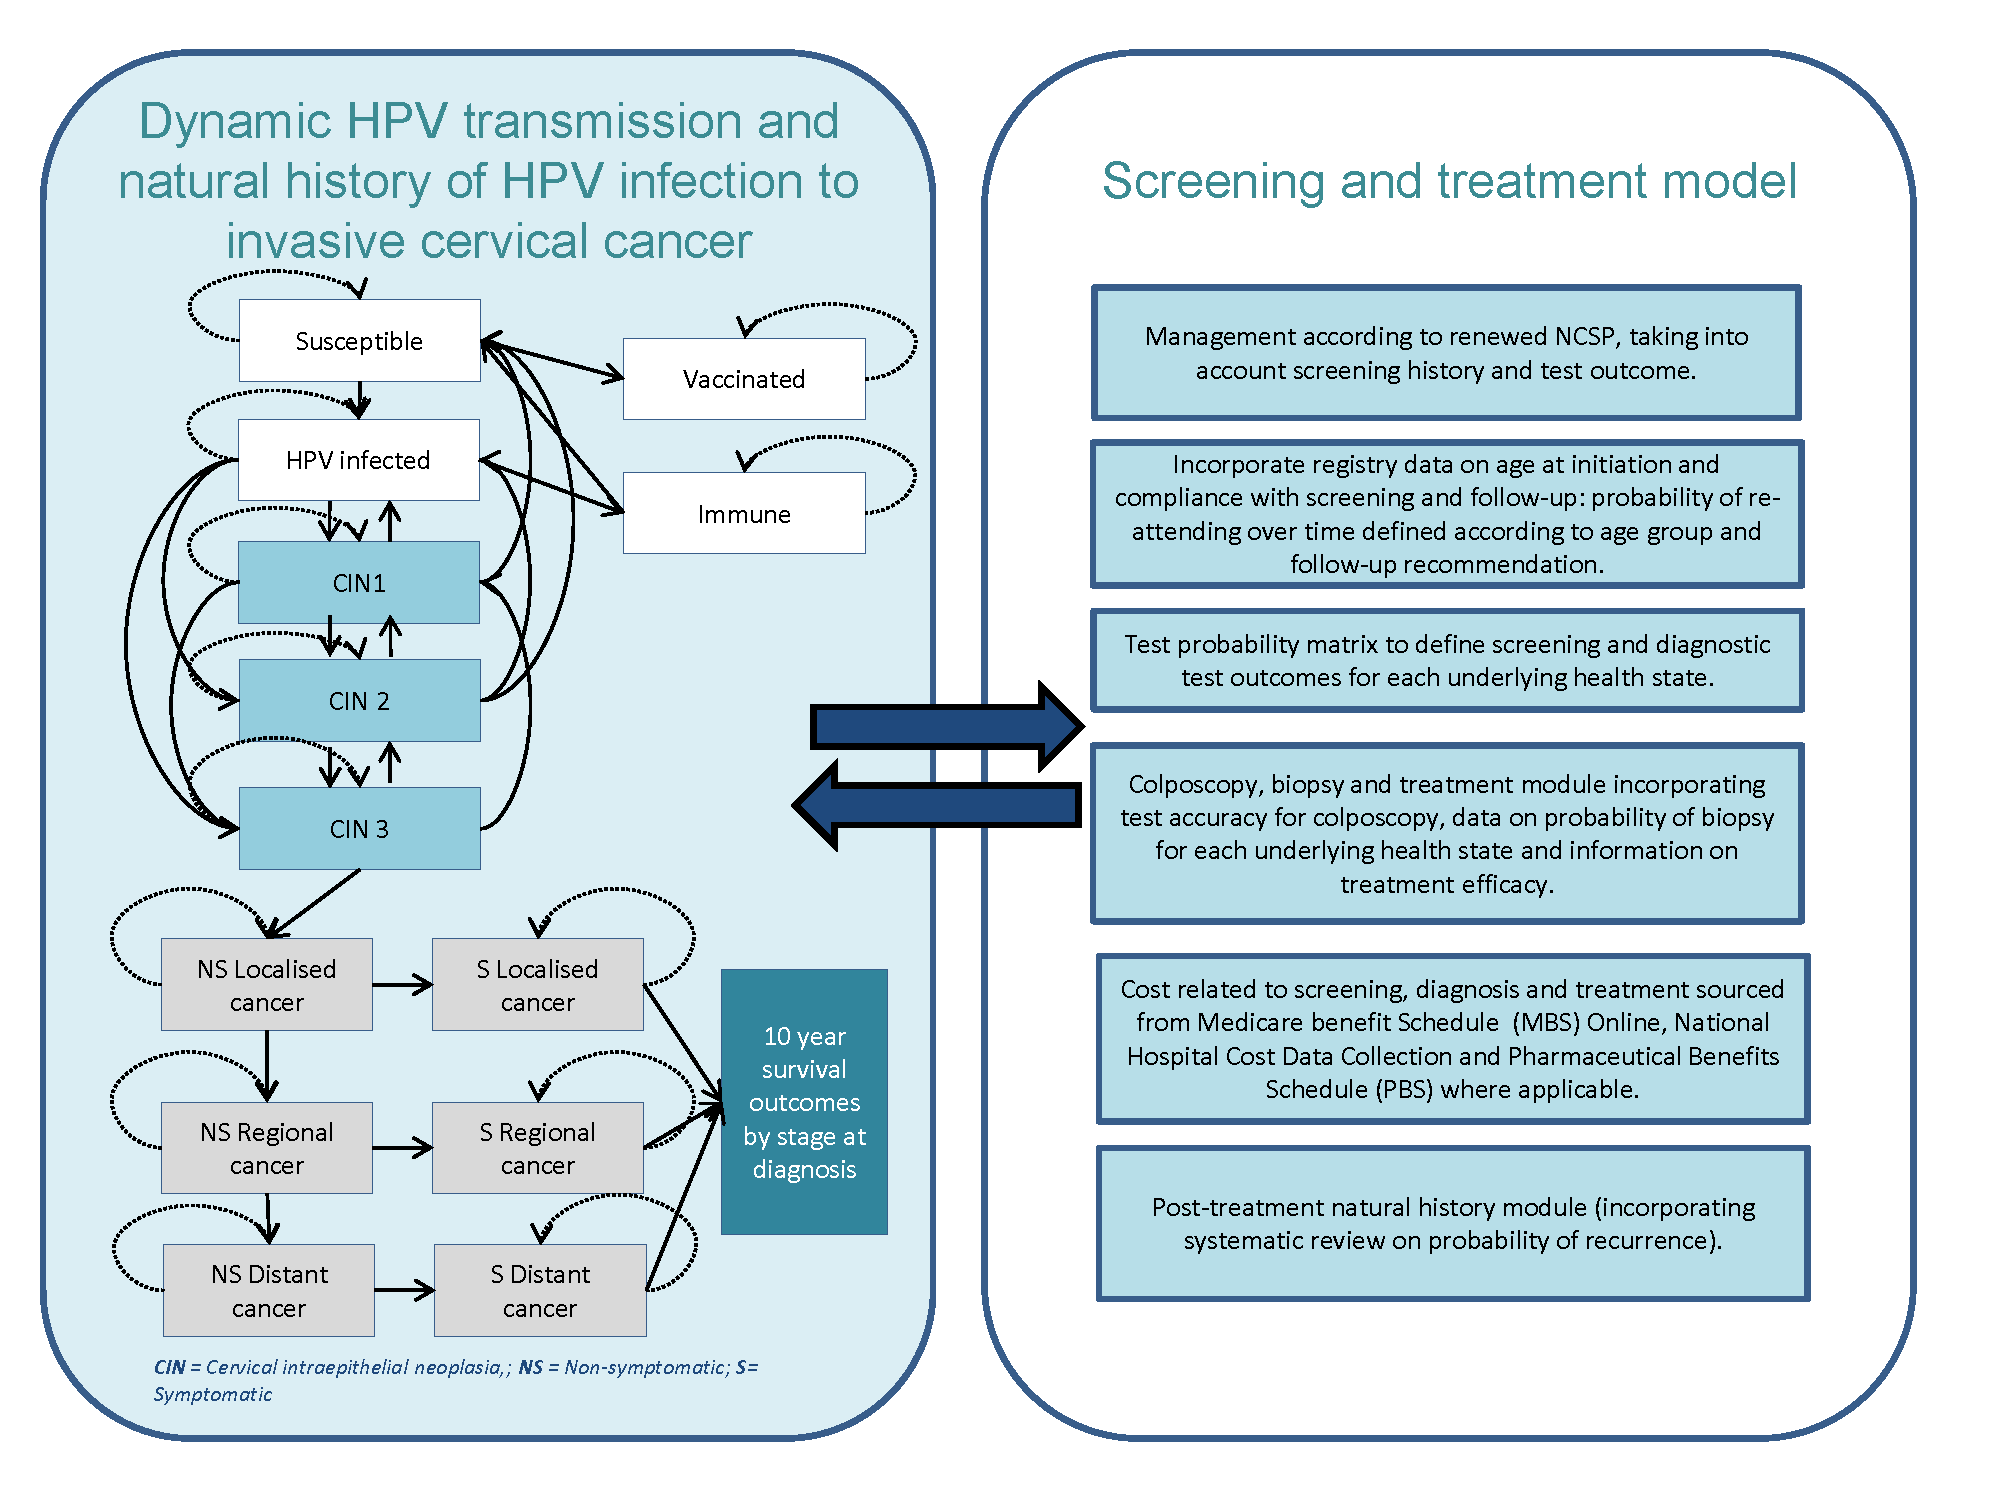 A diagram with many arrows pointing to words and phrases next to an image with text boxes.